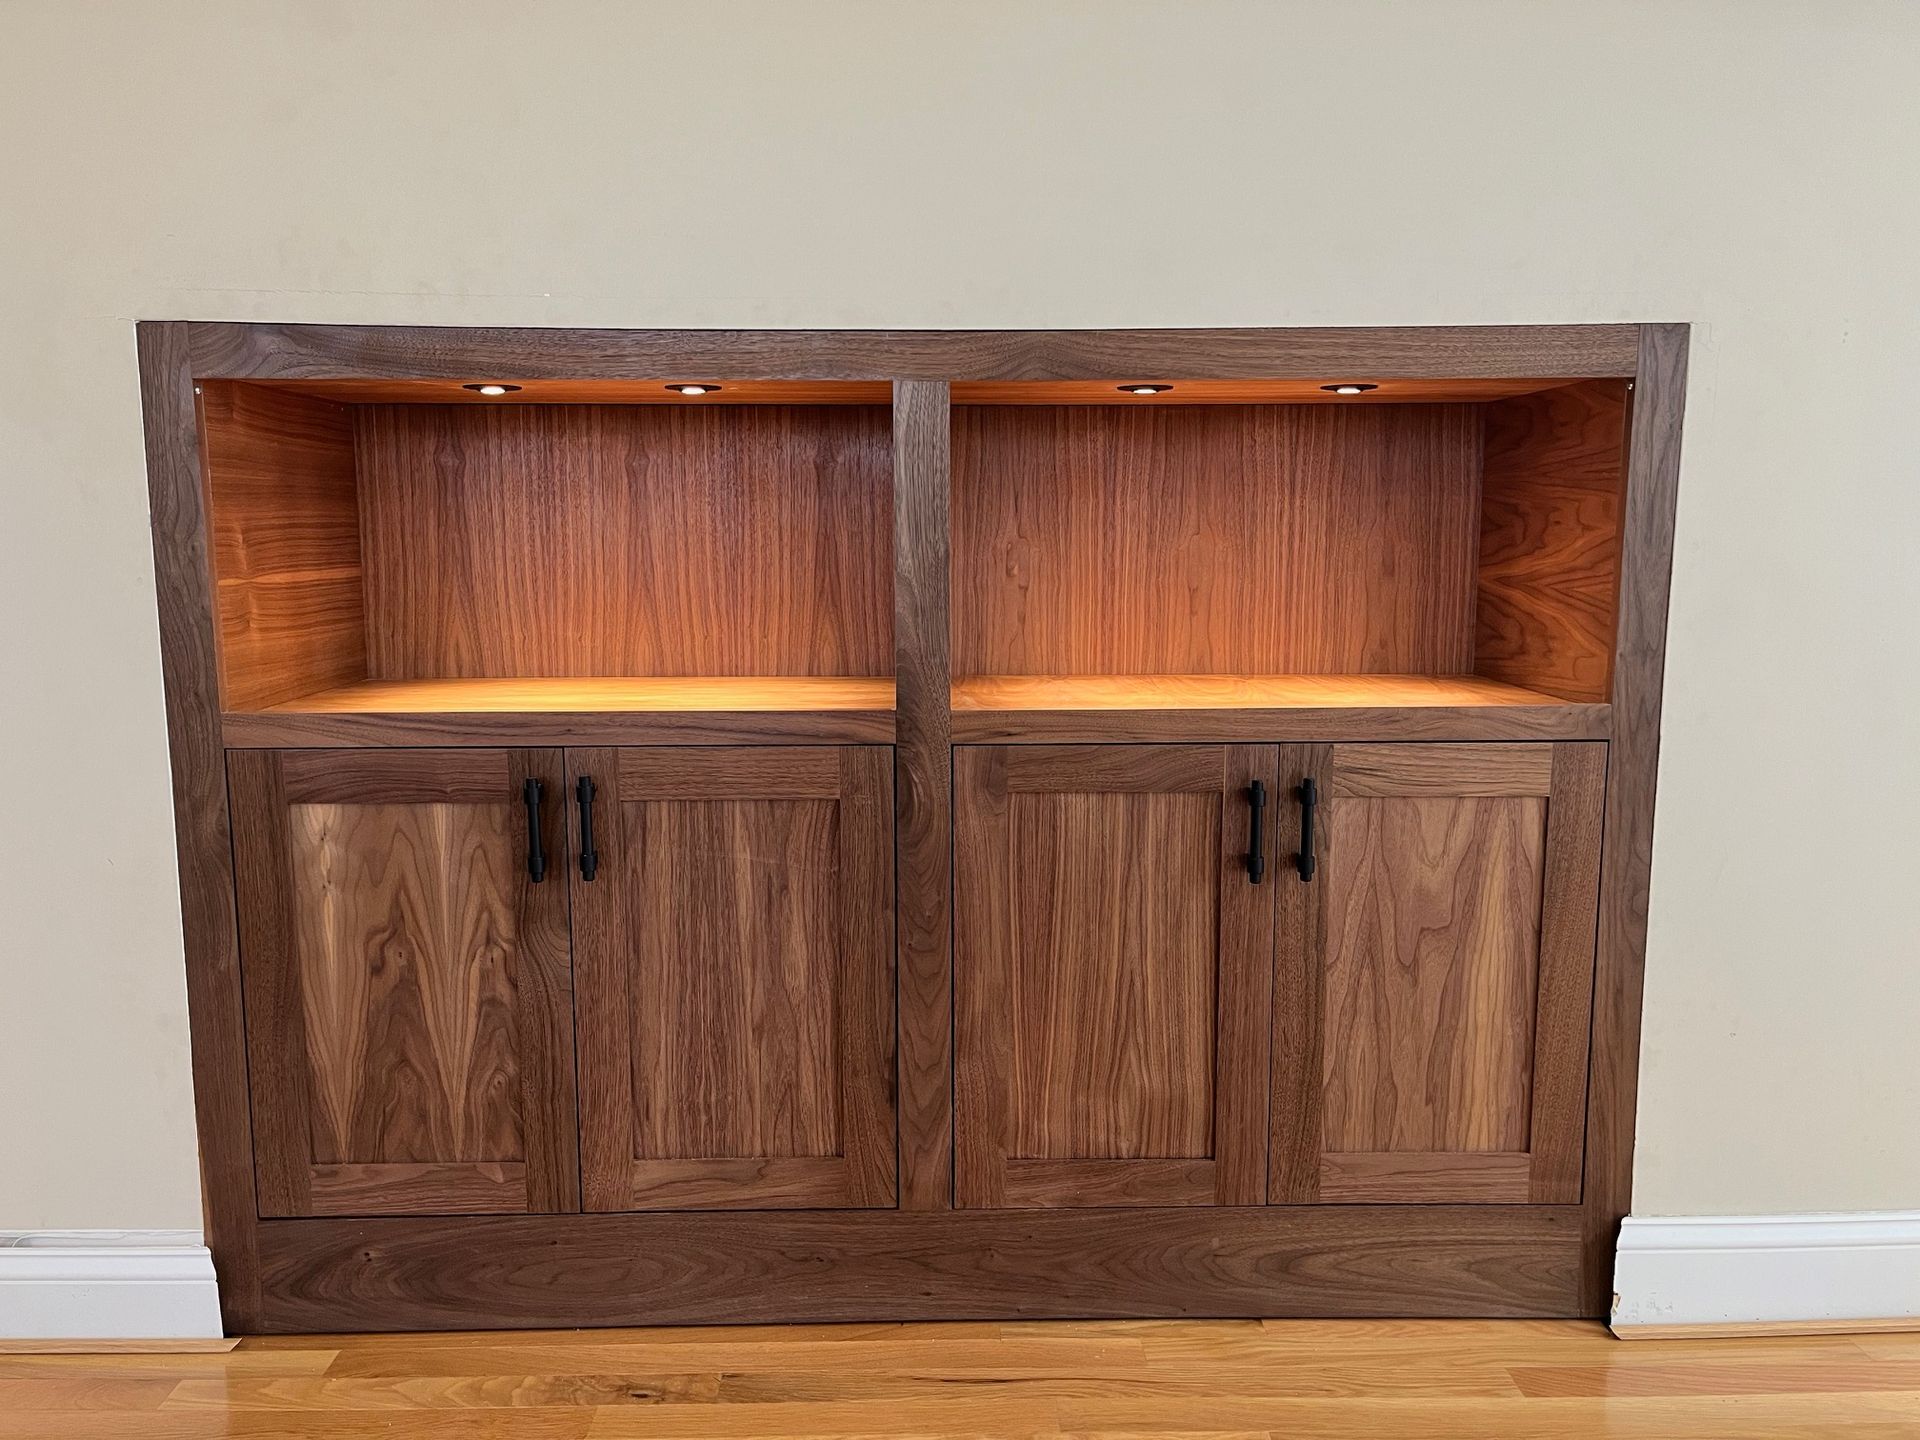 A wooden cabinet with a light on top of it